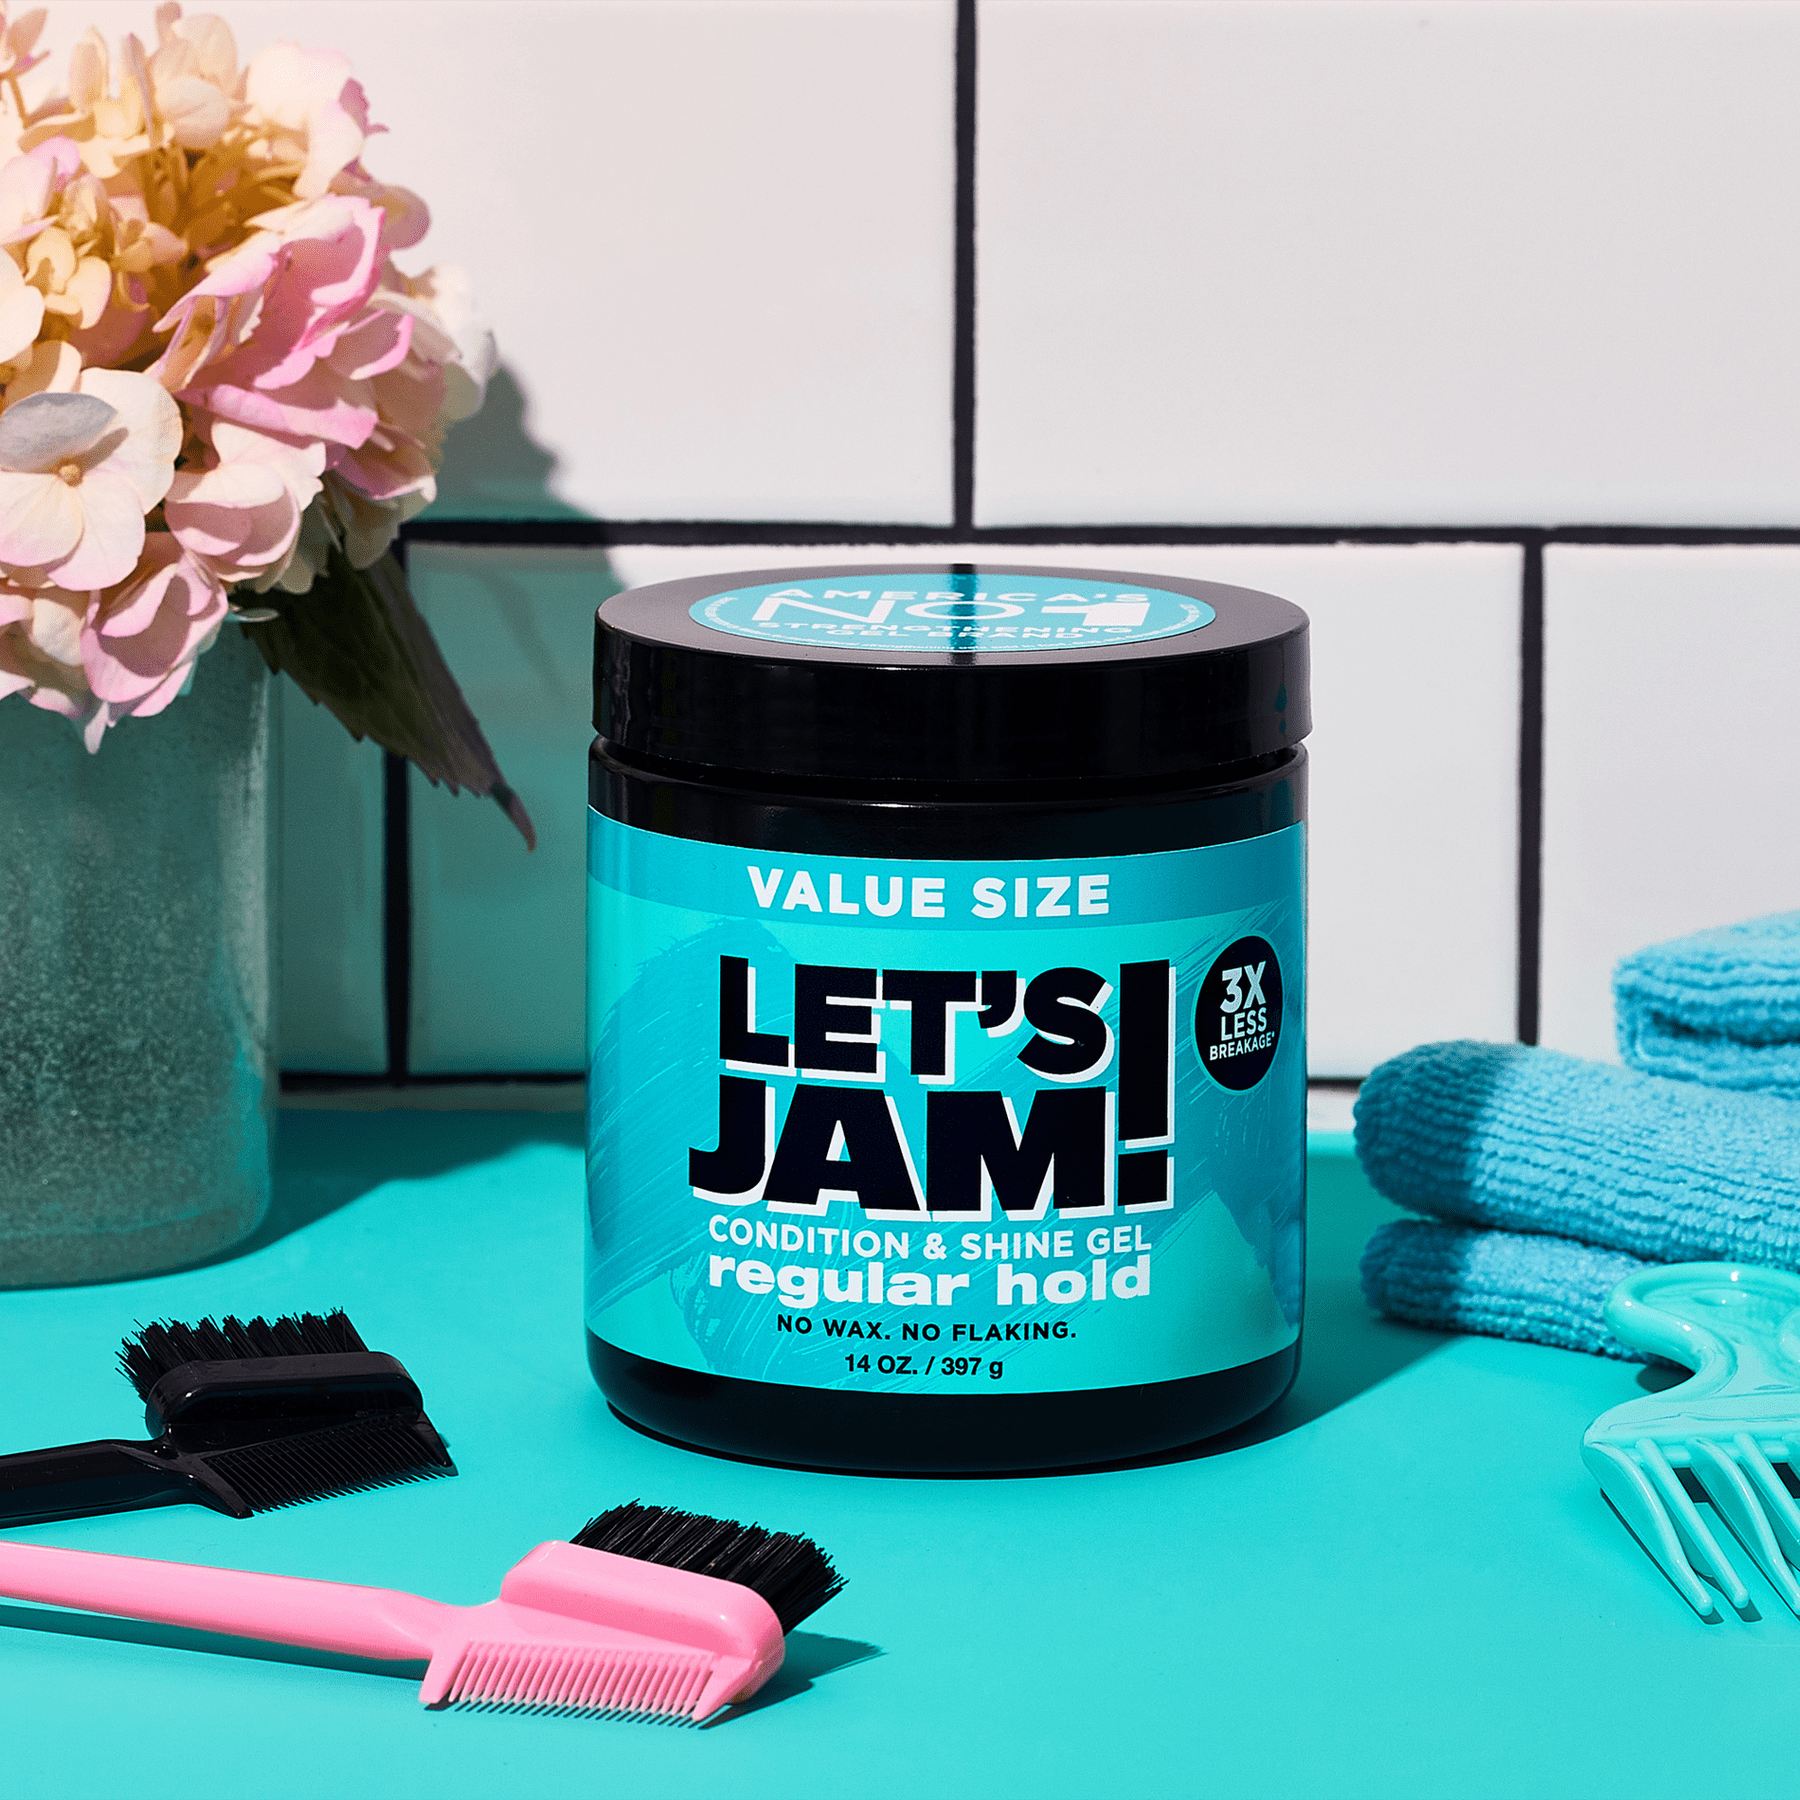 Let's Jam! Conditioning & Shine Extra Hold Styling Hair Gel - 14oz : Target